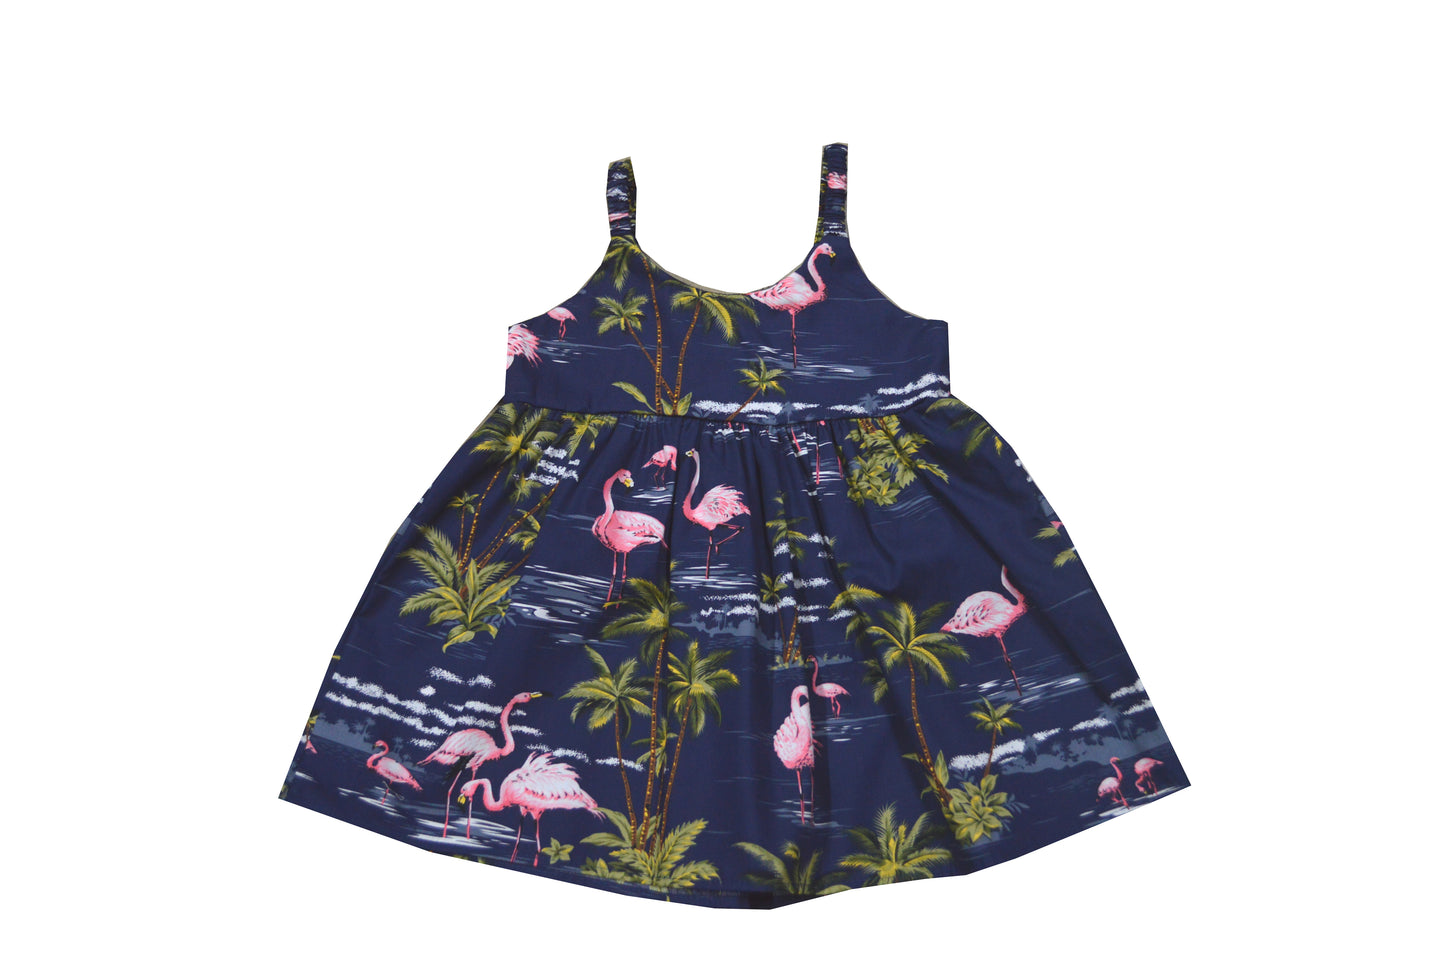 Sunny Bungee dress for Little Girl Flamingo under Palm Tree Soft Cotton Made in Hawaii